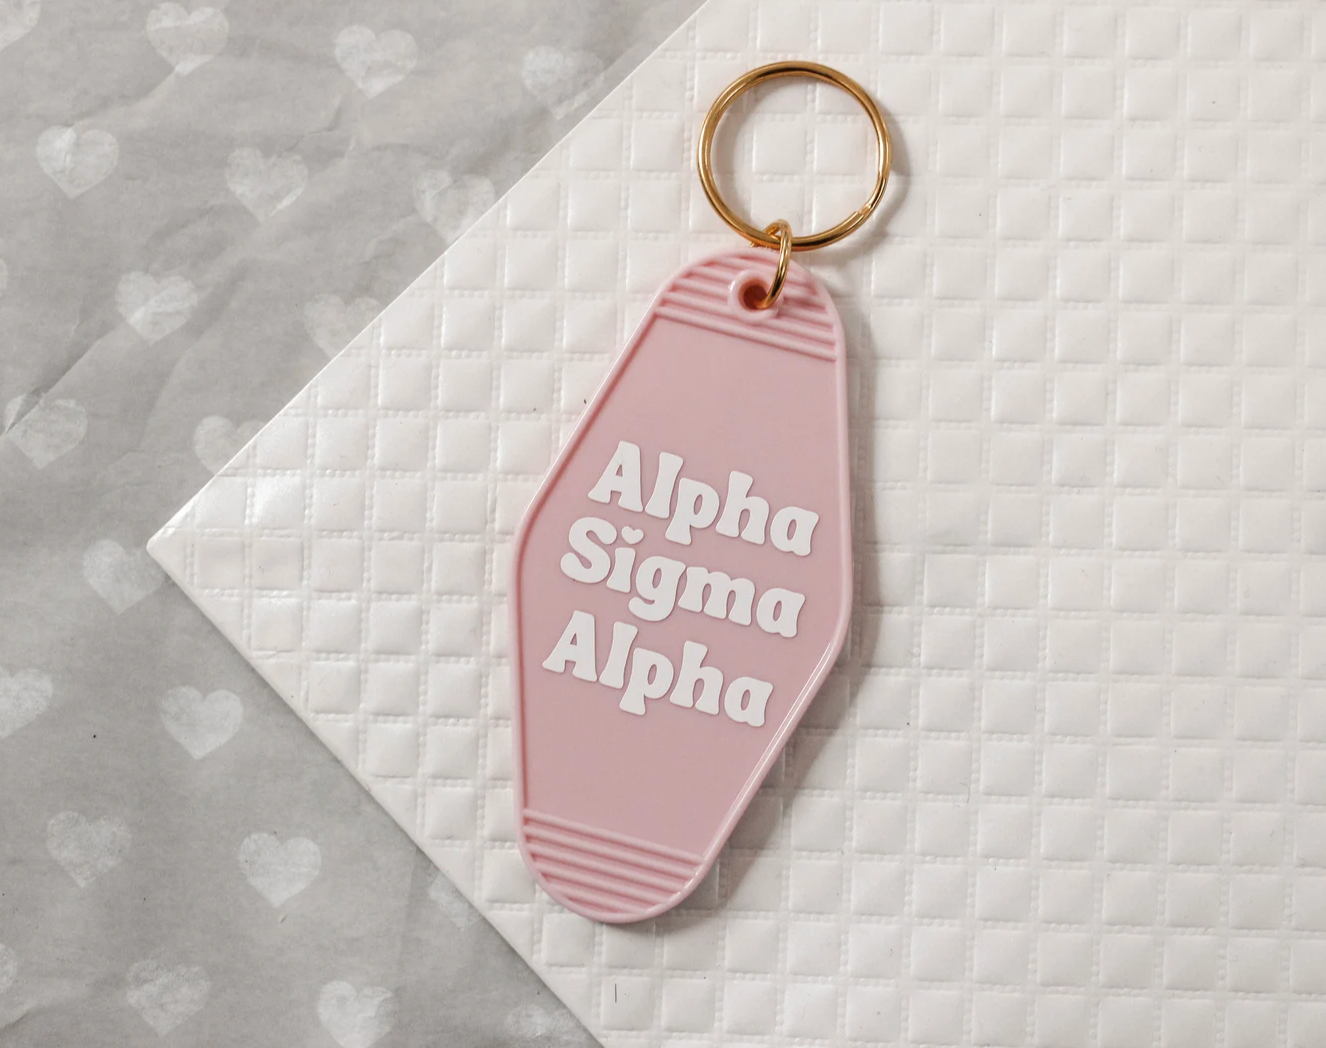 Alpha Sigma Alpha Motel Hotel Key Chain in Soft pink with white letters and gold ring. ASA